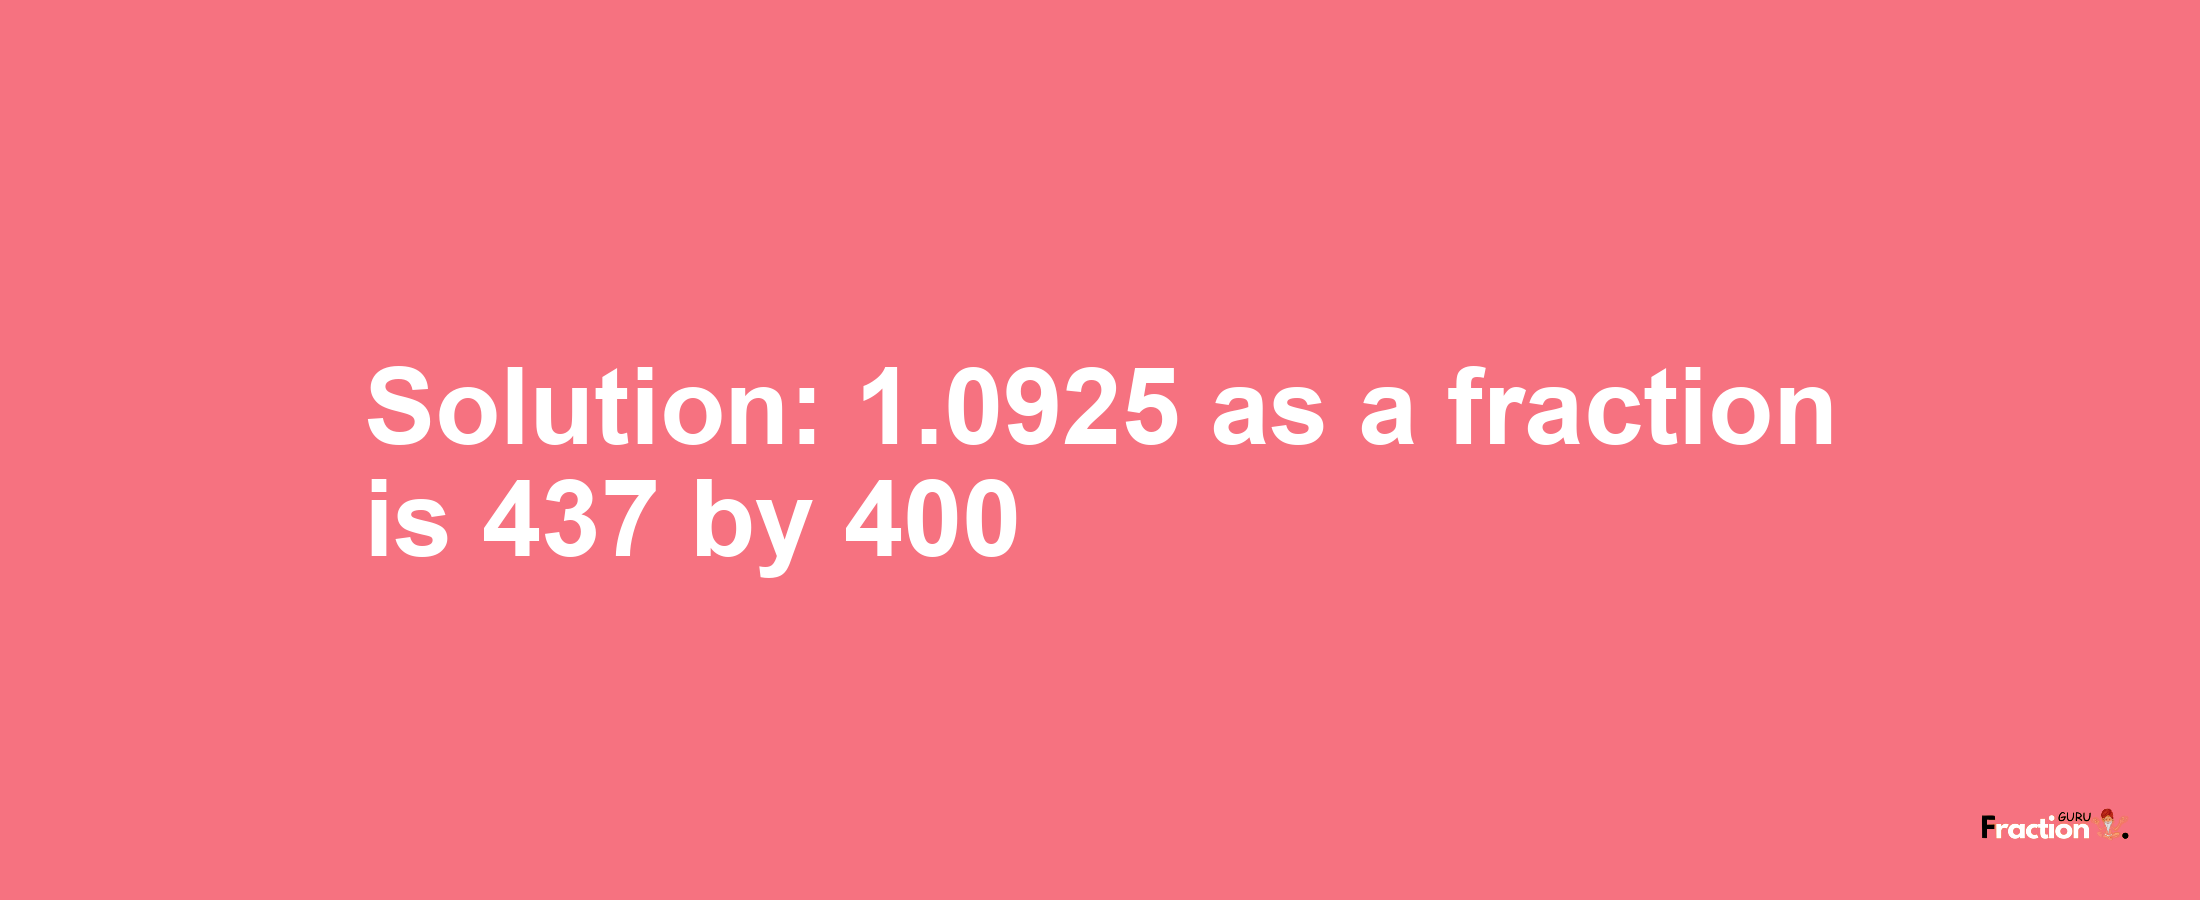 Solution:1.0925 as a fraction is 437/400